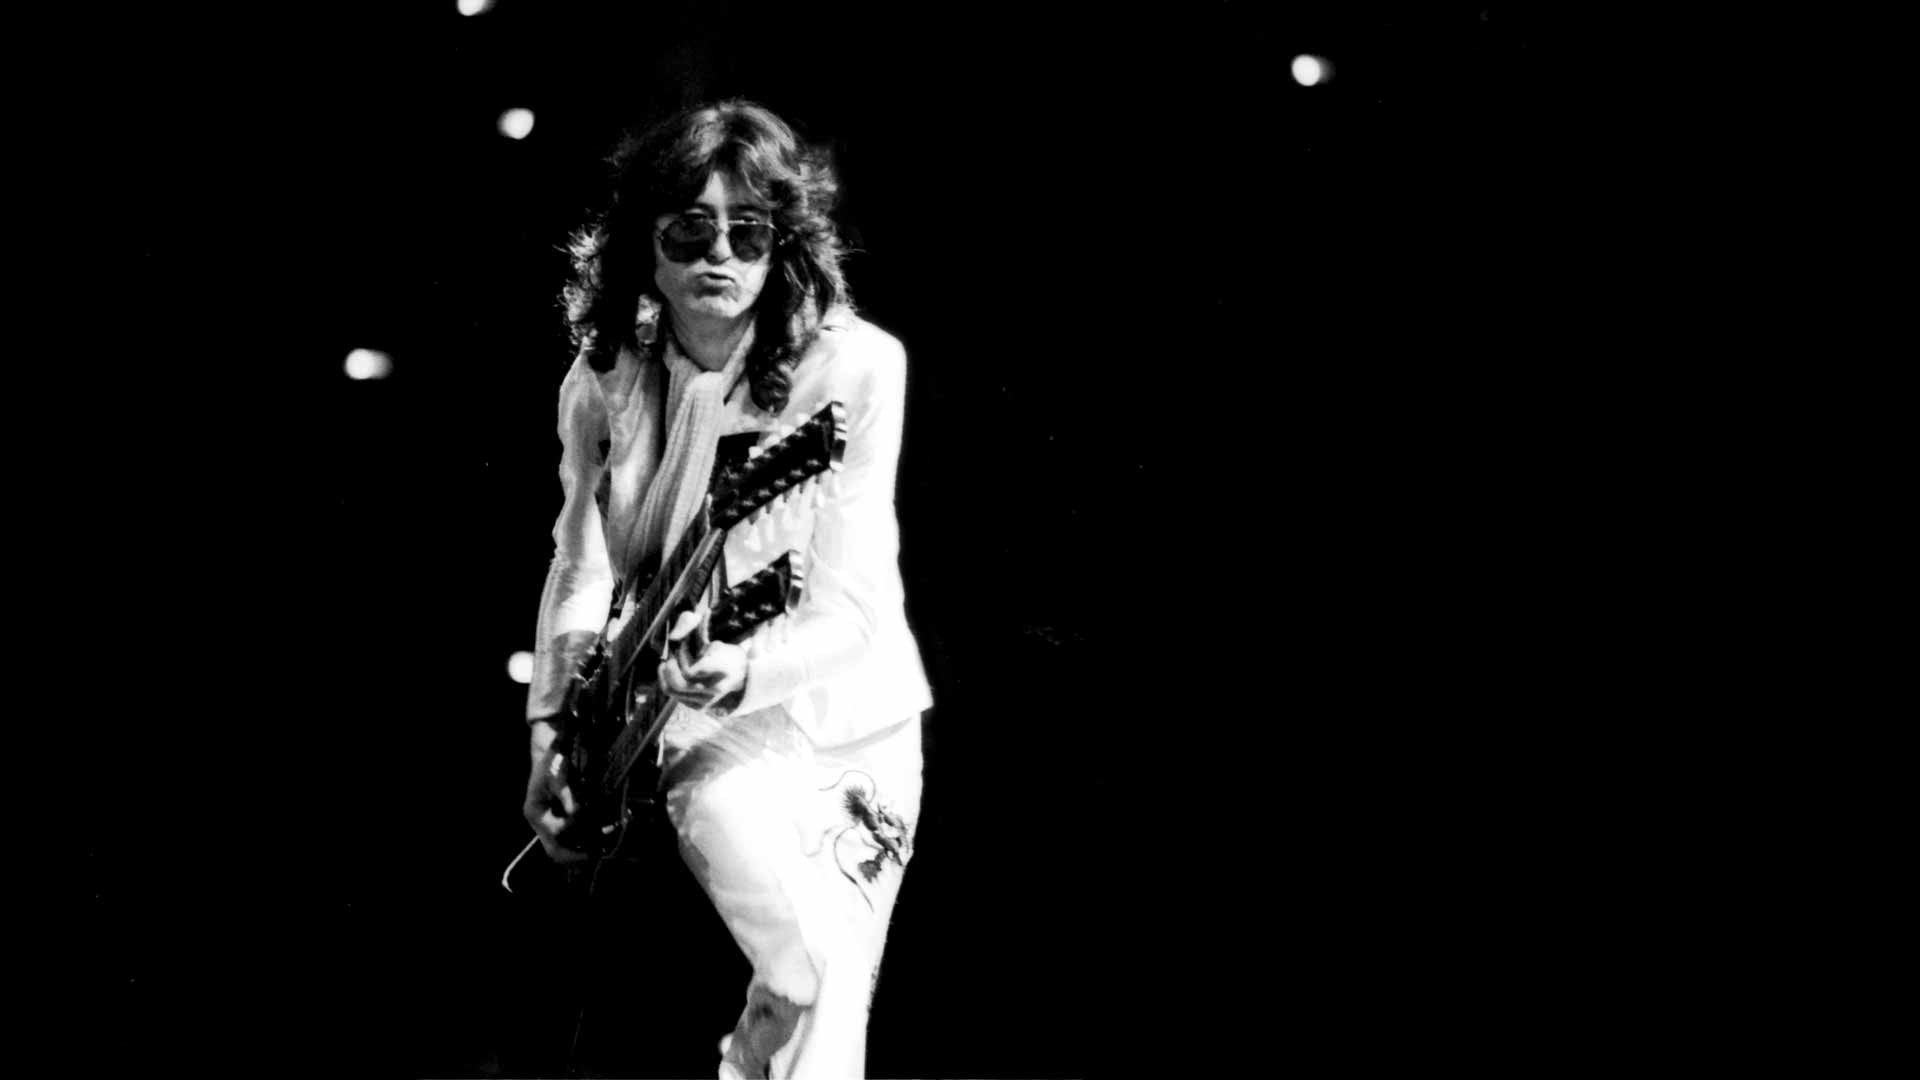 Wallpaper Jimmy Page Led Zeppelin Guitar Musician Guitarist Background   Download Free Image